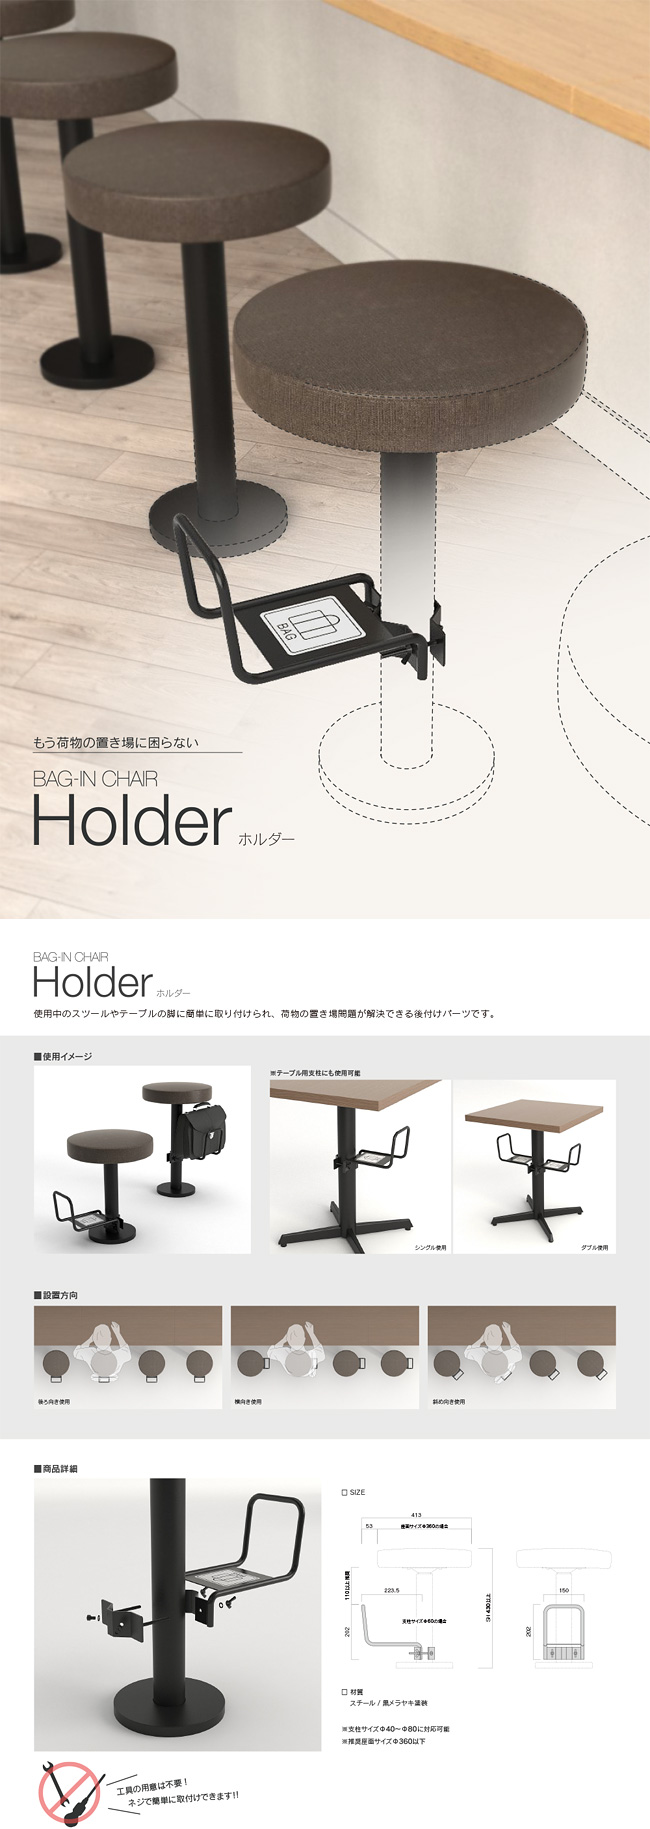 Holder BAG-IN CHAIR